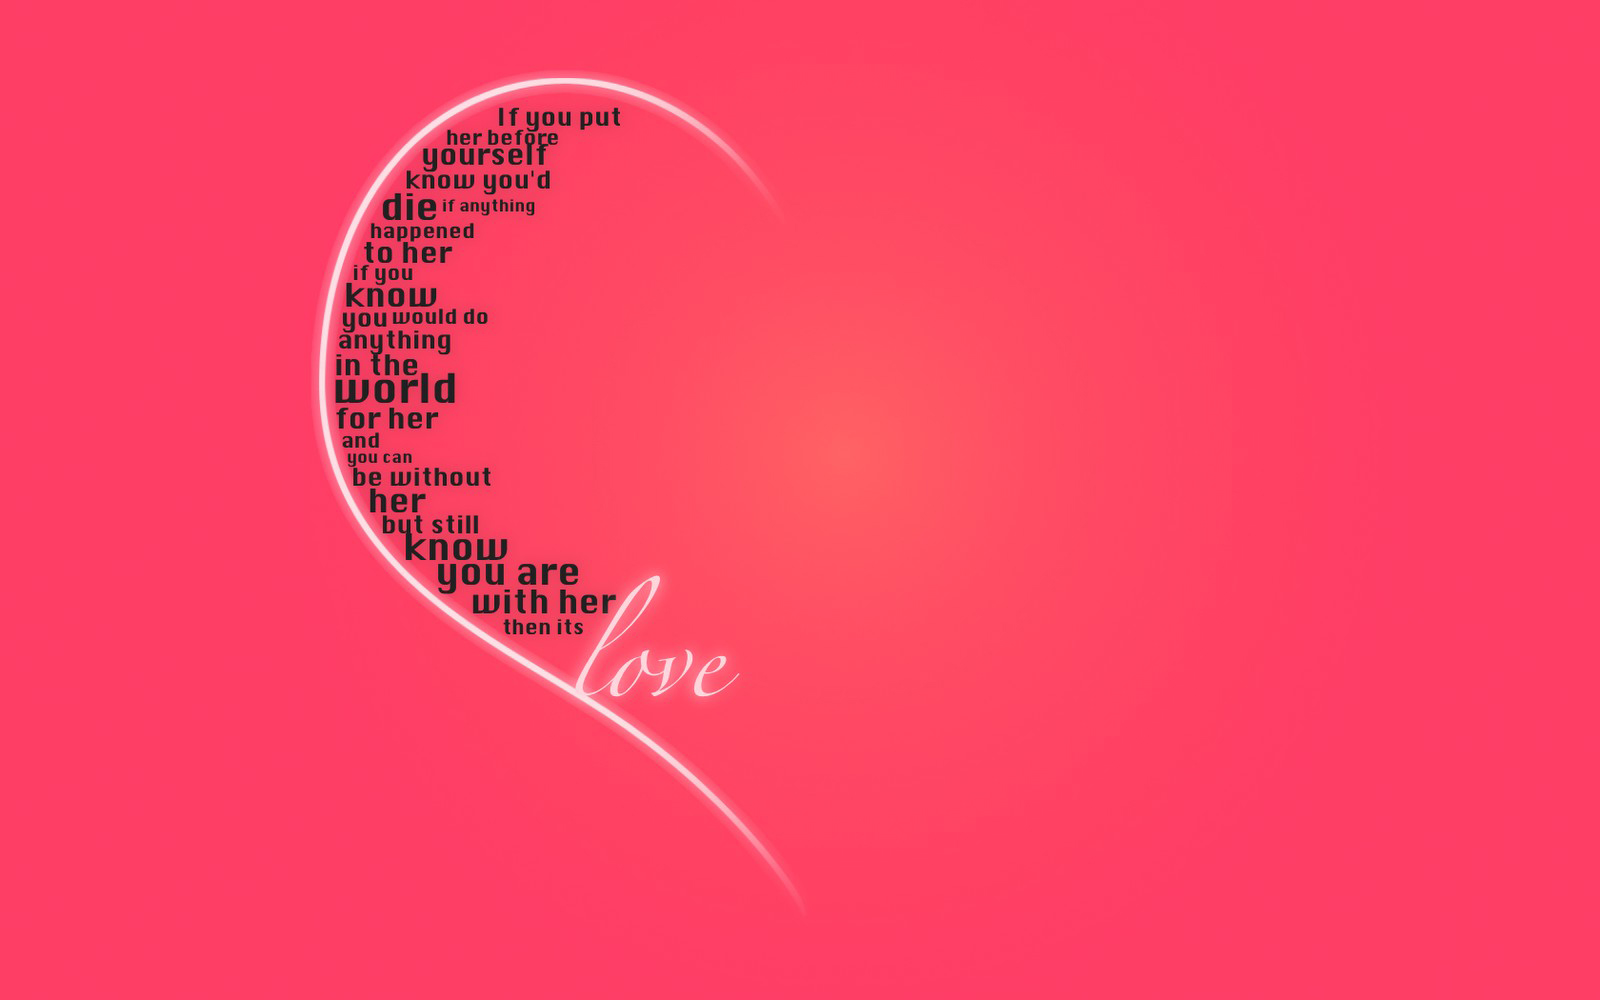 Explore Quotes About Family Love And More! - Family Love, Transparent background PNG HD thumbnail